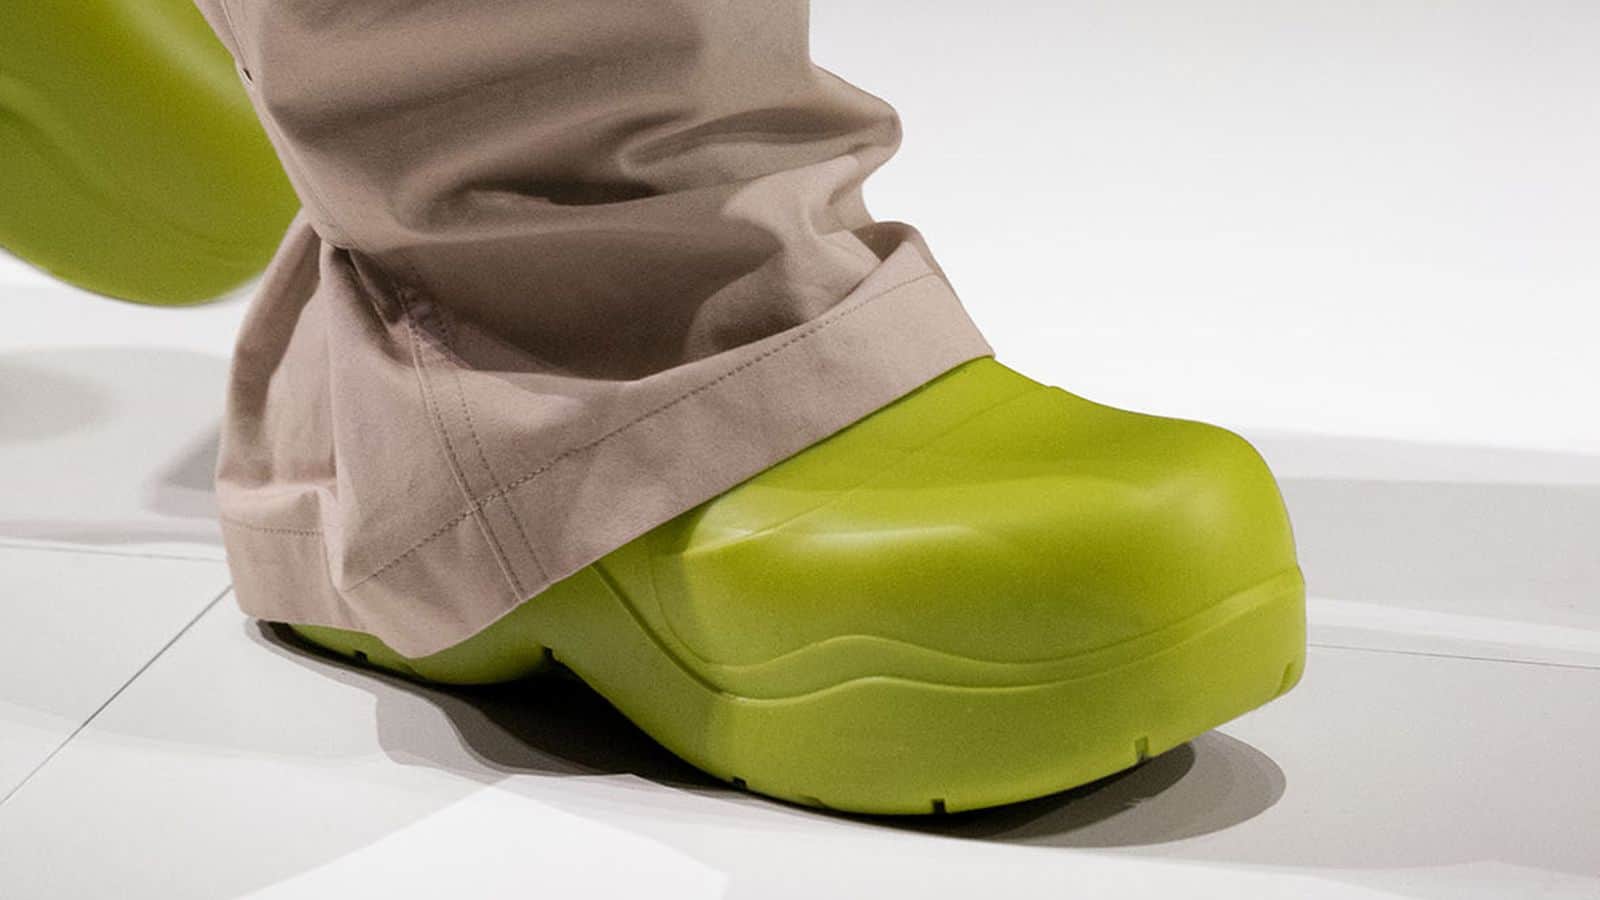 Step into sustainability with biodegradable shoes